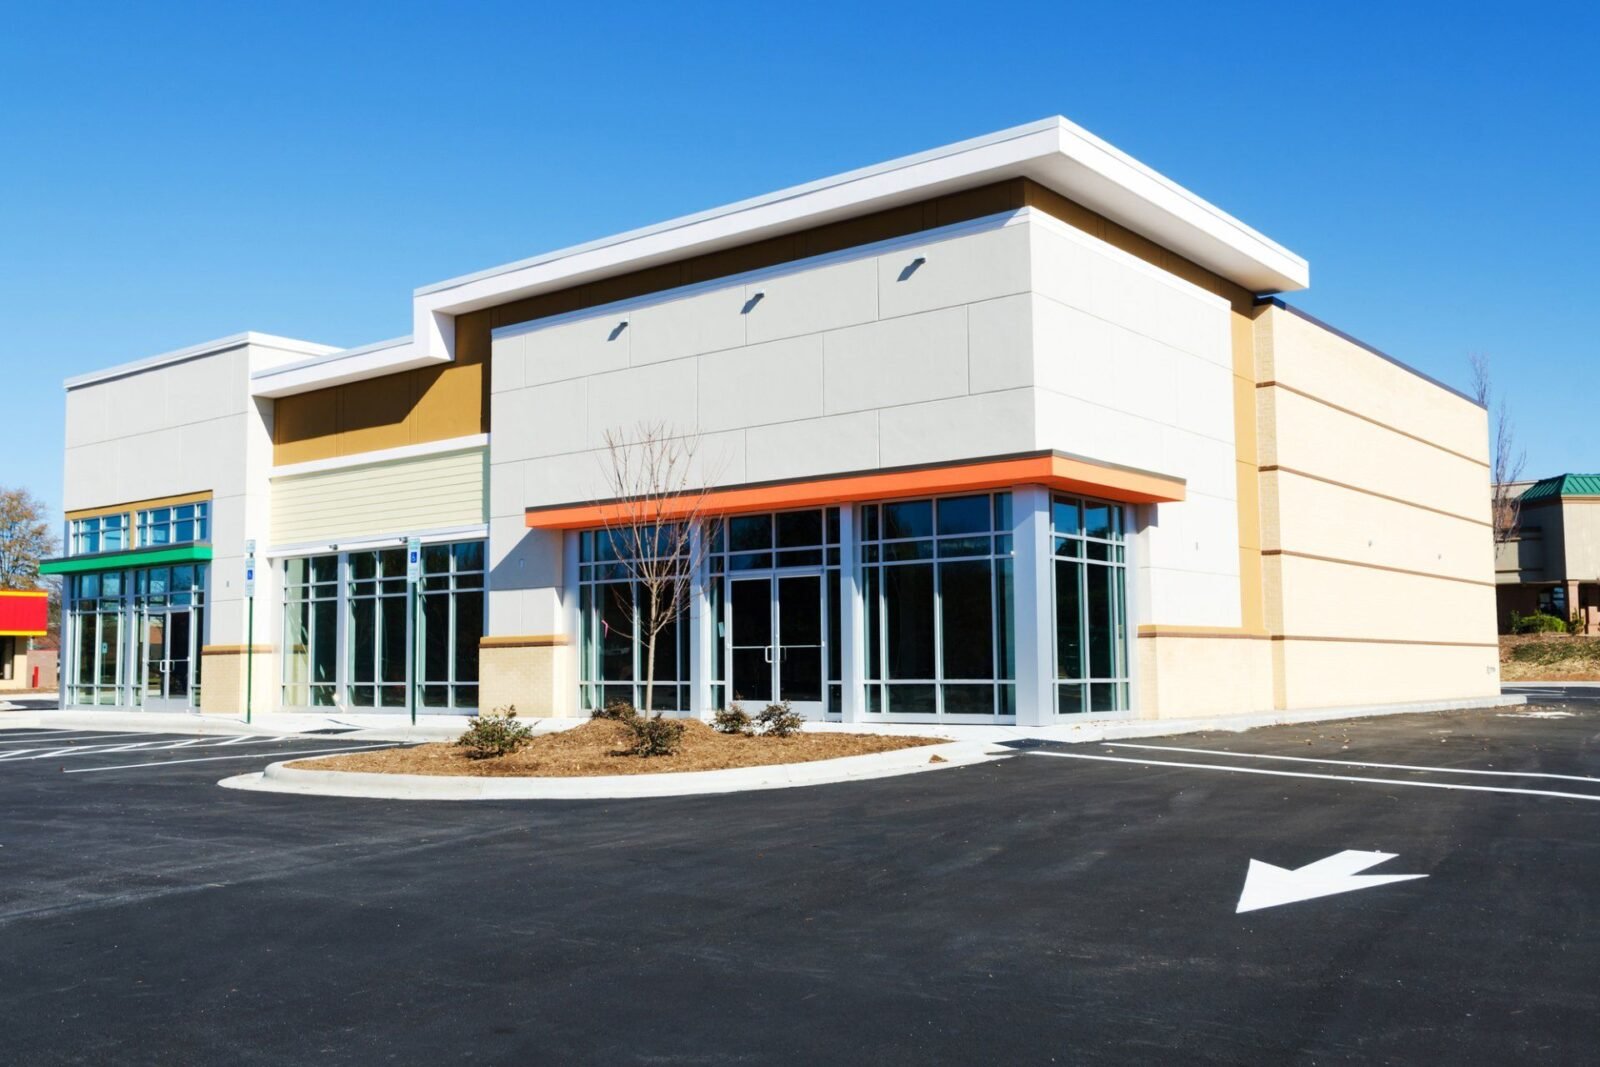 A modern and newly constructed commercial building with large glass windows and a flat roof. Located in Palm Beach County, the building is surrounded by an empty, freshly-paved parking lot with a white arrow painted on the asphalt pointing away from the building. The sky is clear and blue.